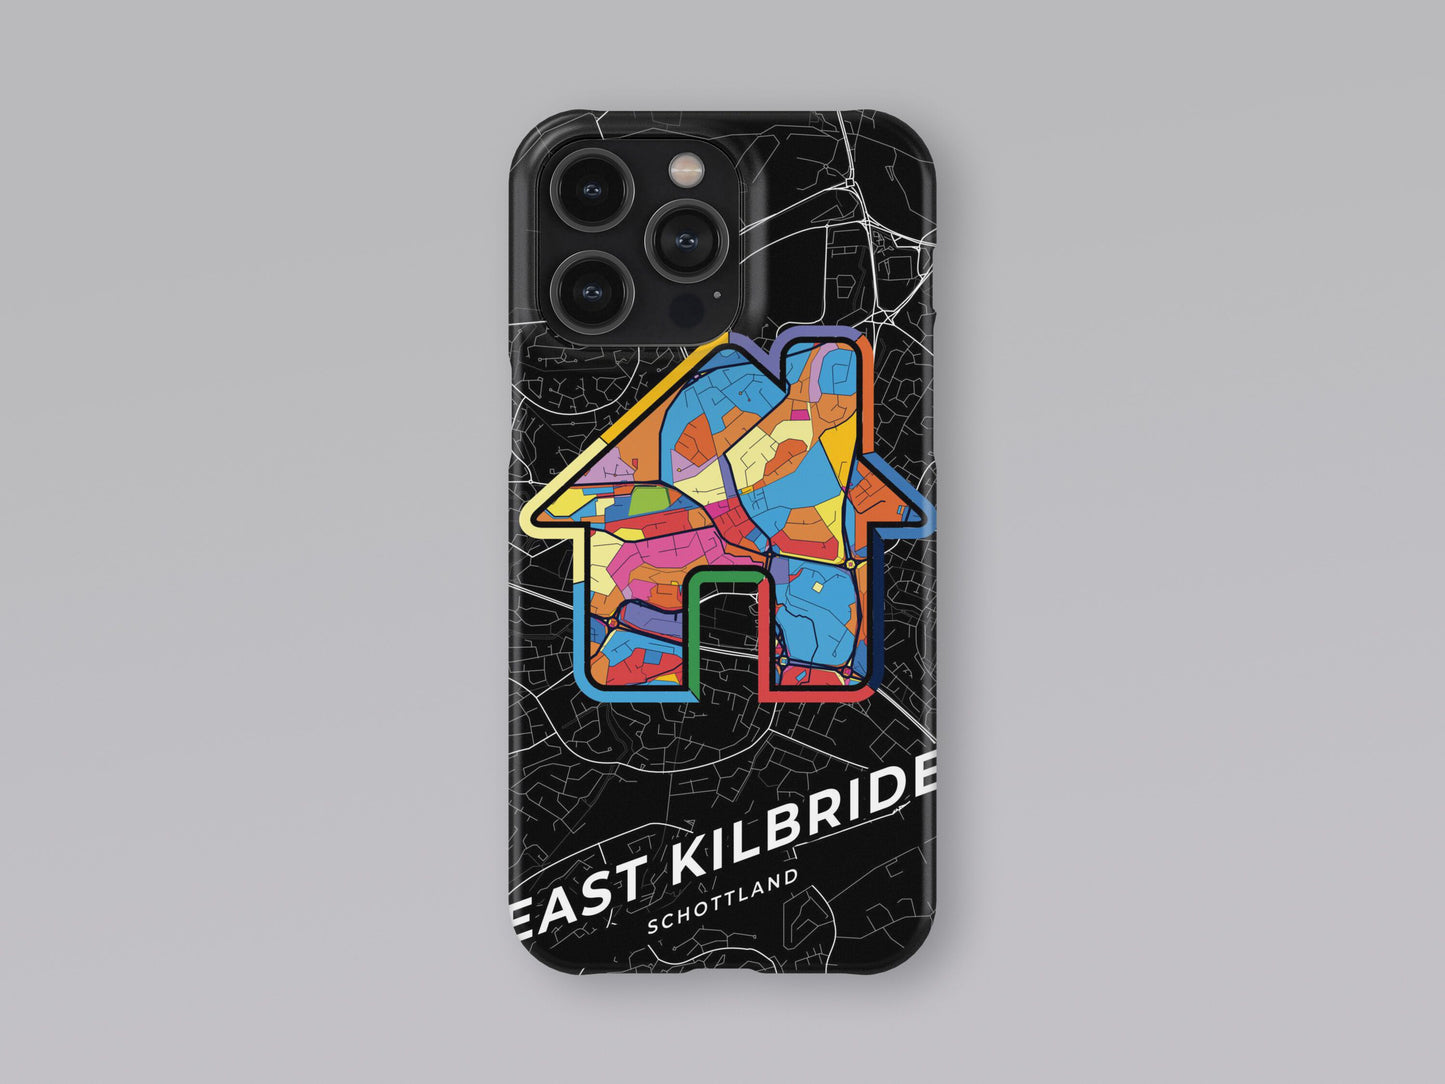 East Kilbride Scotland slim phone case with colorful icon. Birthday, wedding or housewarming gift. Couple match cases. 3